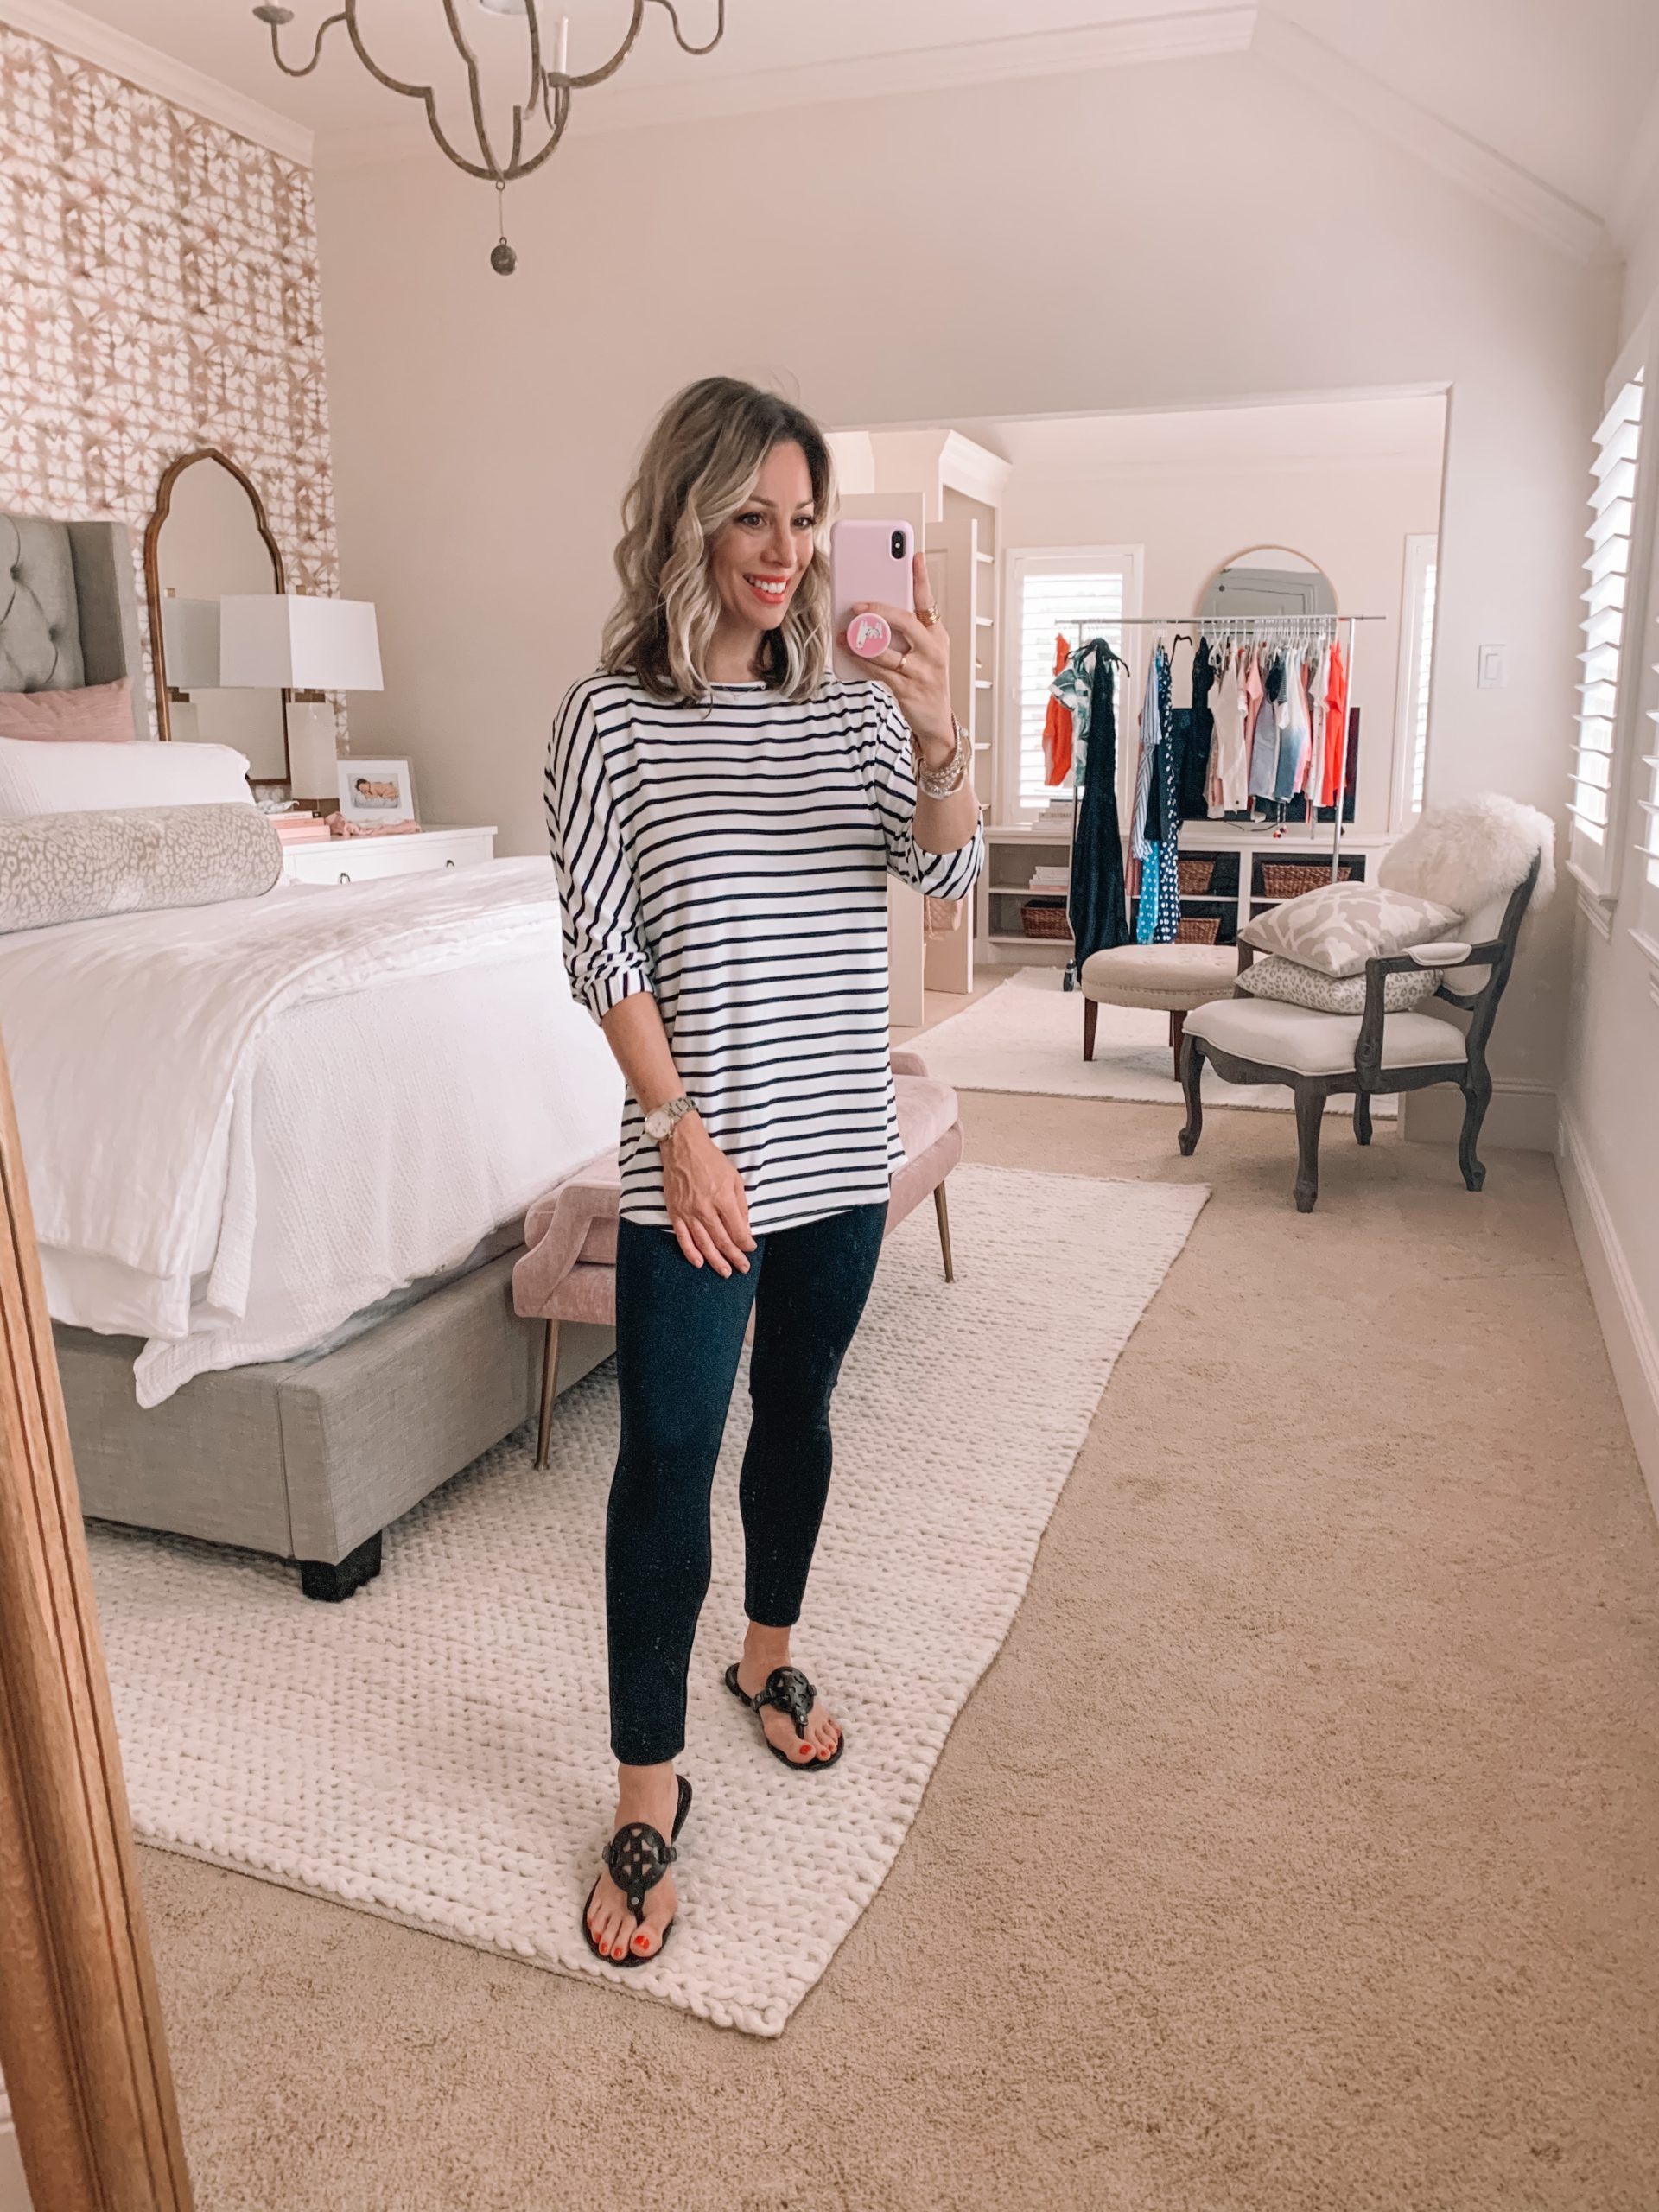 Amazon Fashion - Striped Jersey Bunch Sleeve Top, Black Ponte Leggings, Miller Dupe Sandals